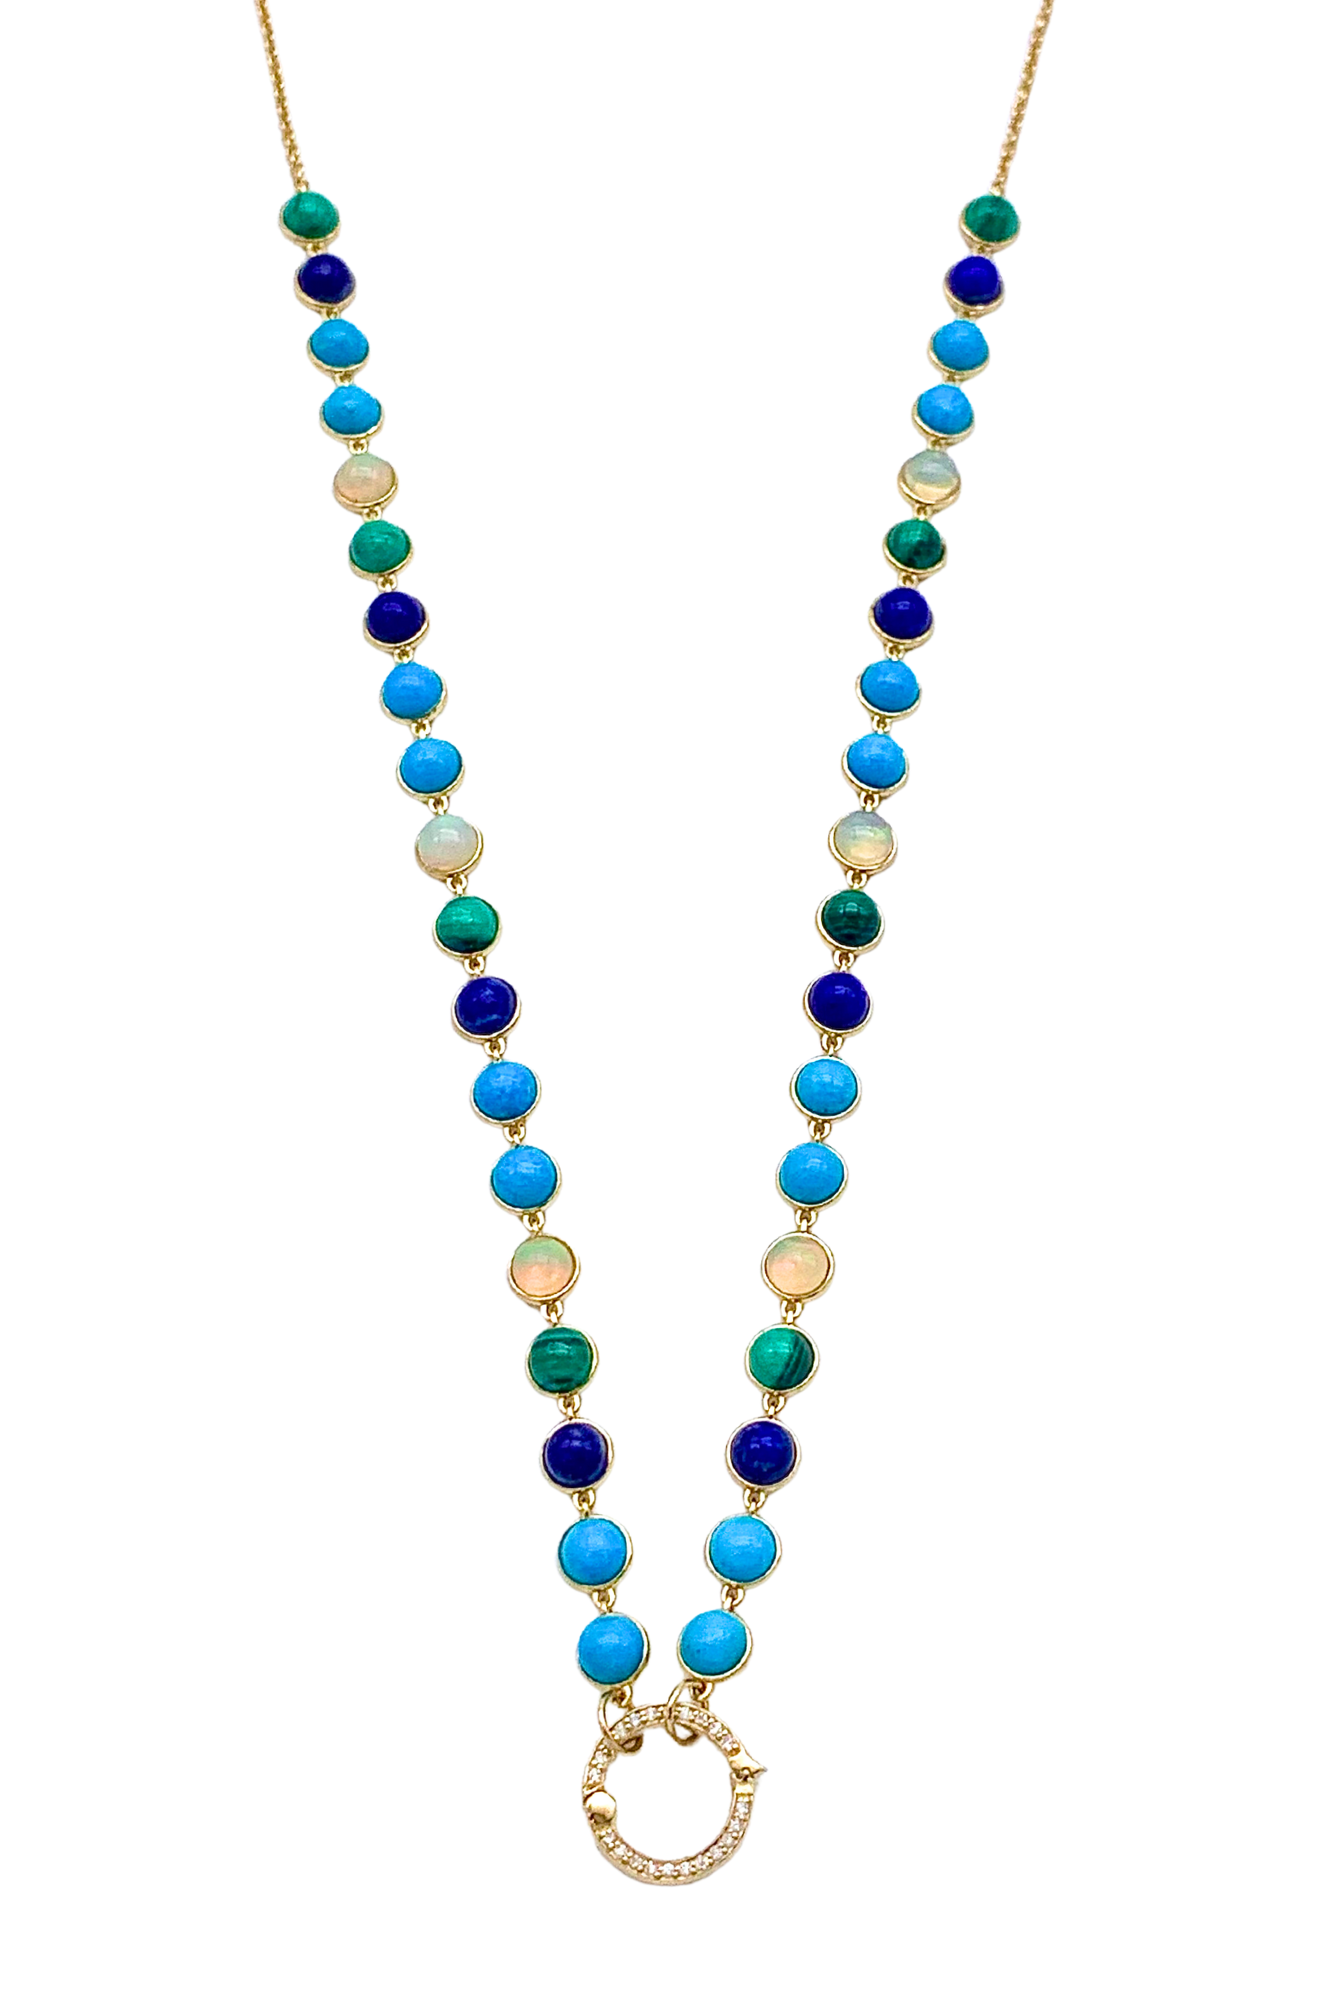 This colorful Opal Cabochon Closure Necklace from Eden Presley is a playful piece to add to your fine jewelry collection.